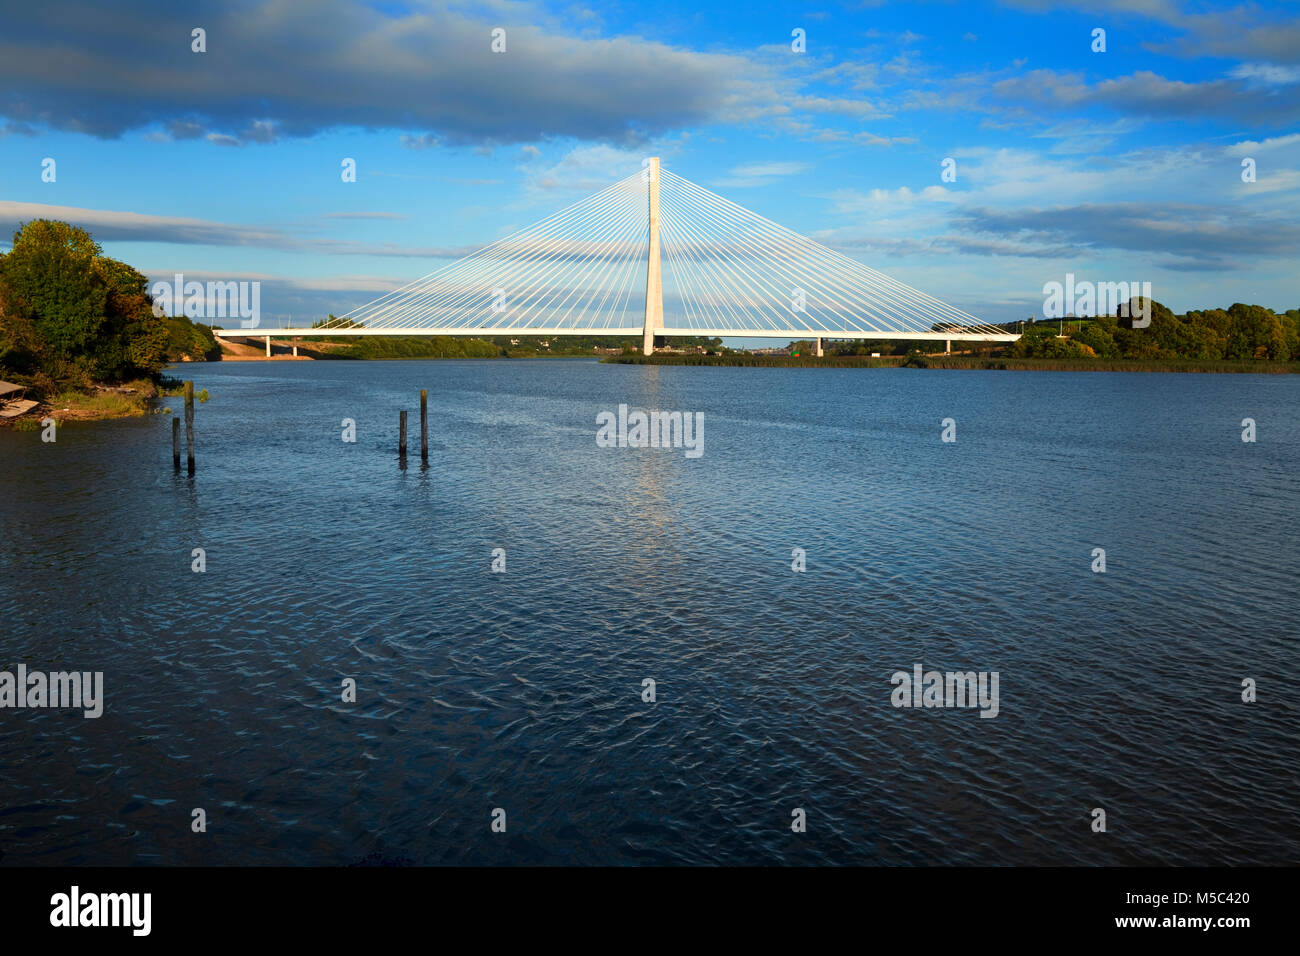 (New) Waterford Suir Bridge, The Longest Cable Stayed Bridge in Ireland, County Waterford, Ireland Stock Photo